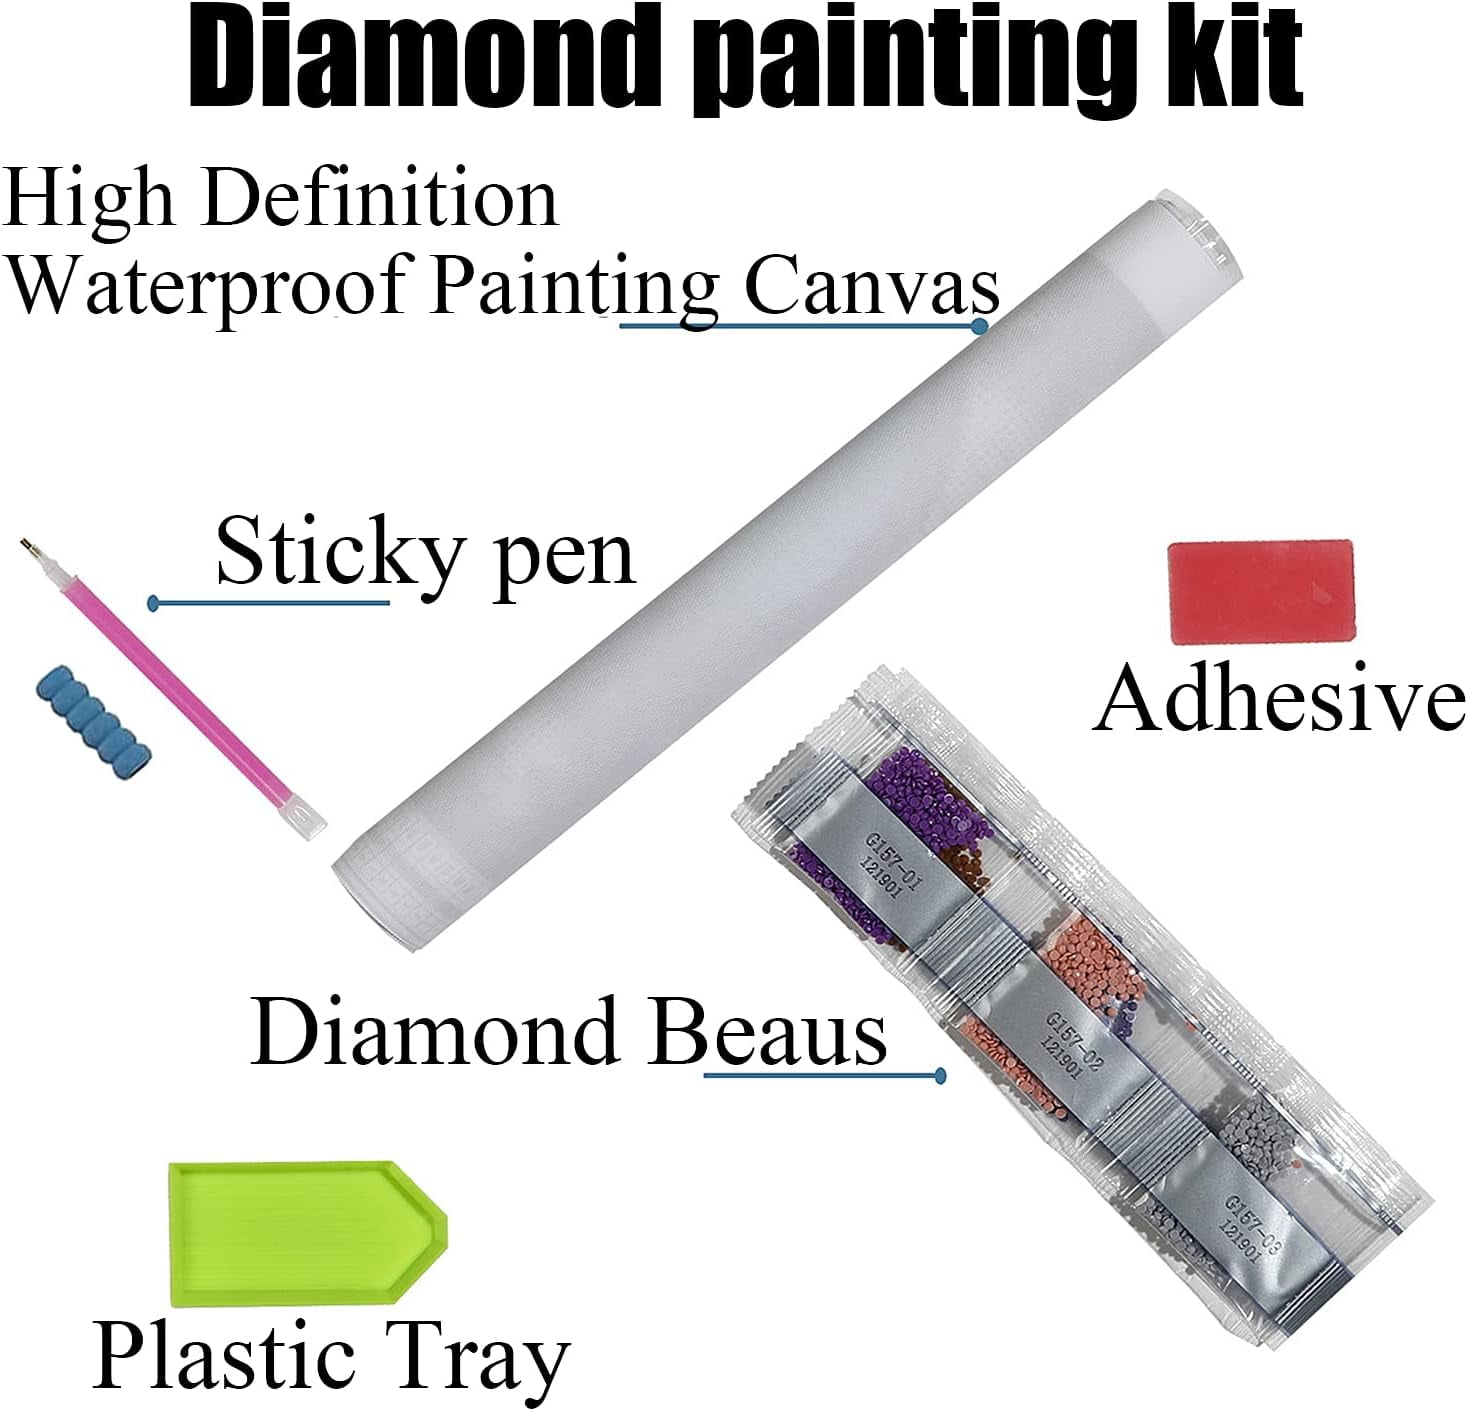 5D Diamond Painting Kits for Adults,Beauty and the Beast Diamond